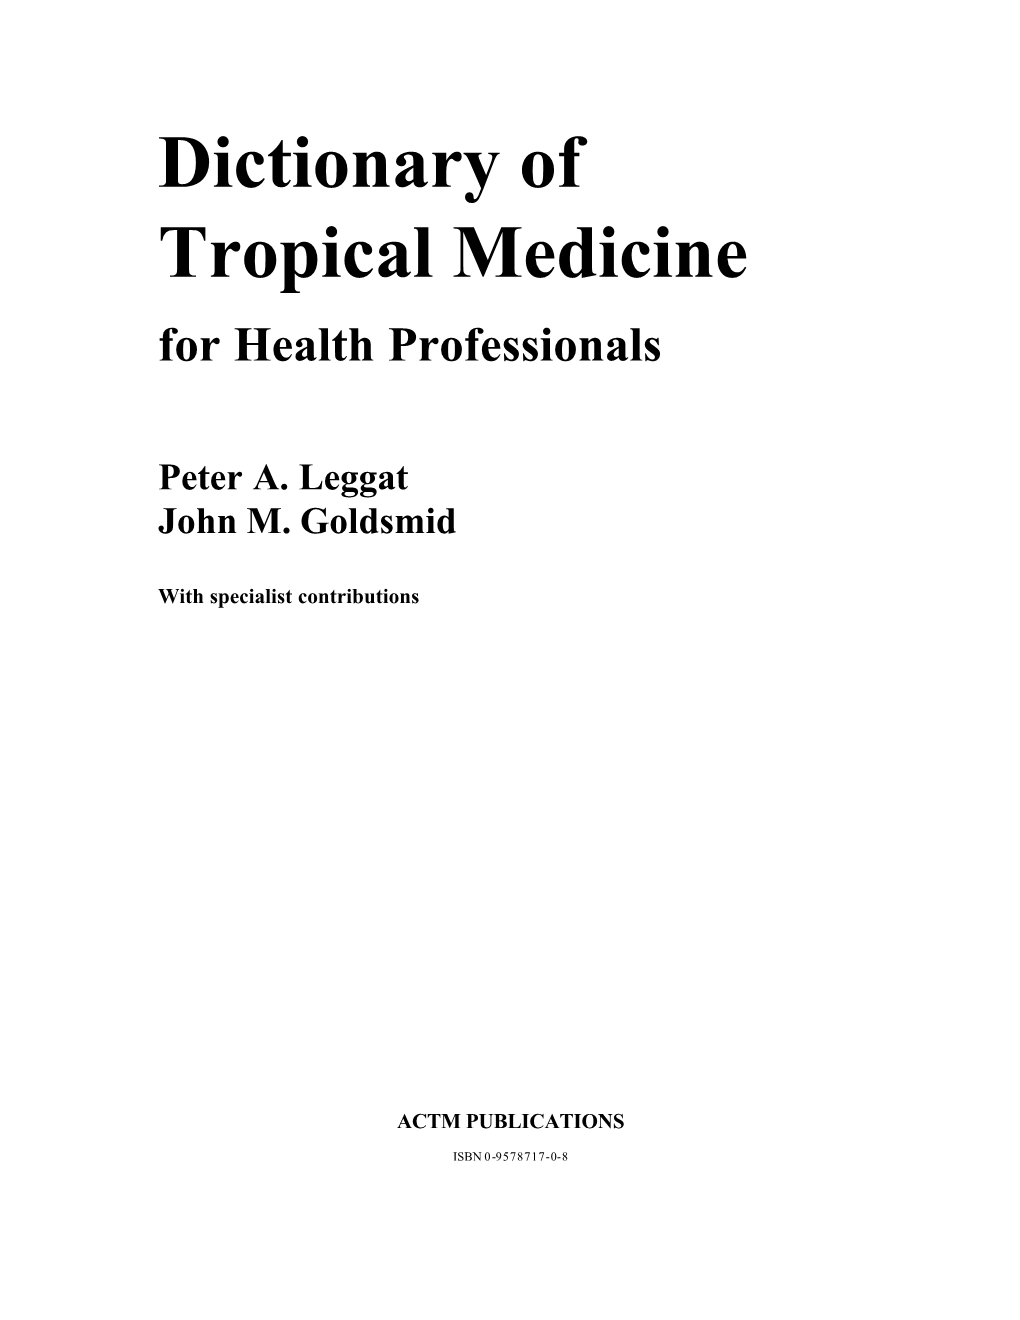 Dictionary of Tropical Medicine: for Health Professionals